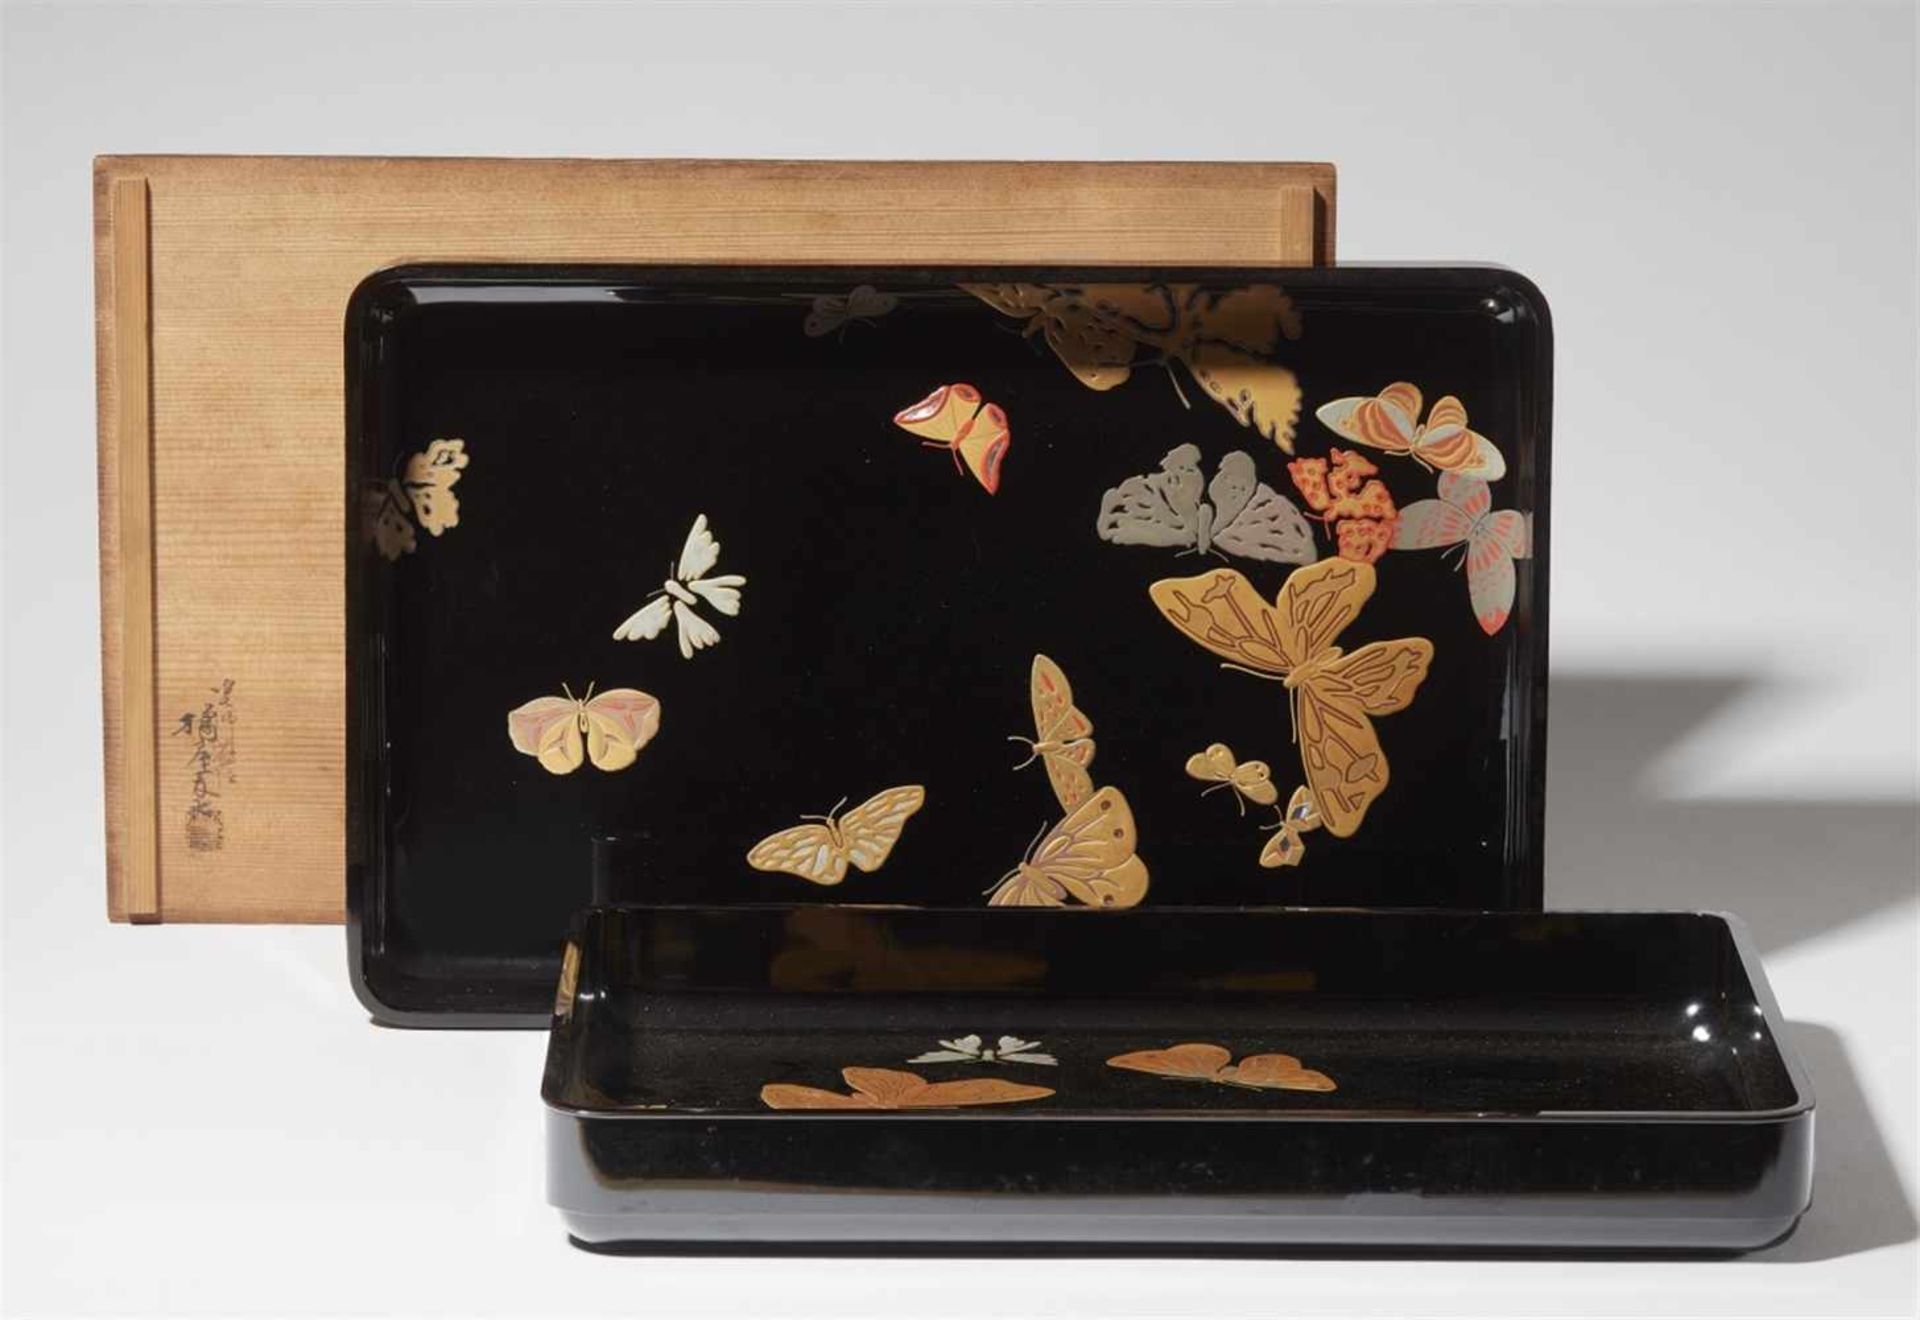 Two lacquer trays for kimono. Late 19th century